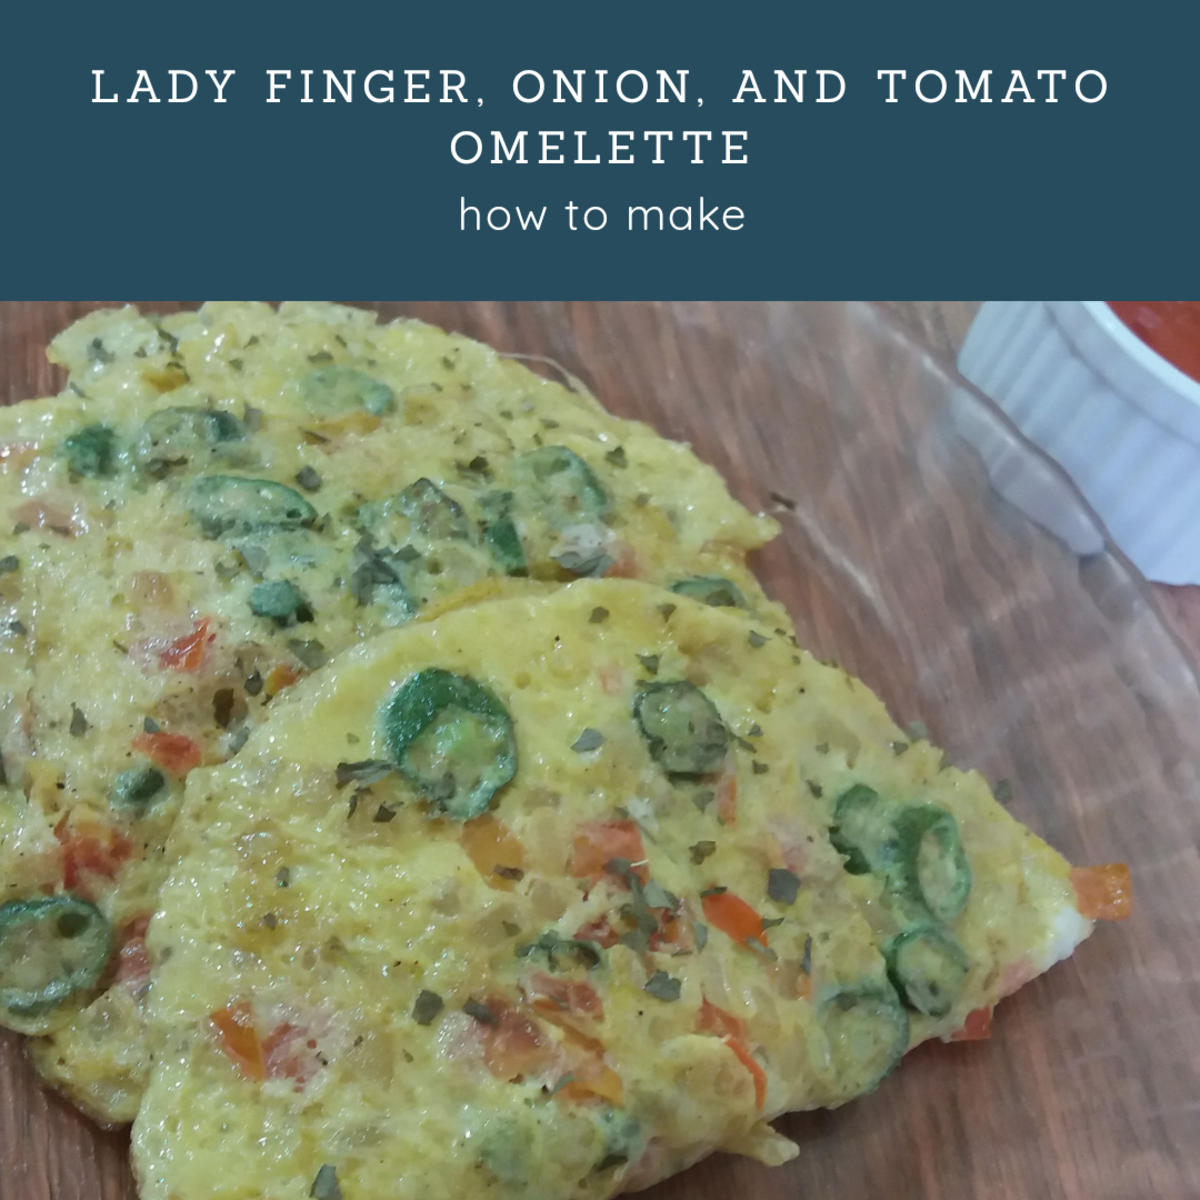 How to Make Lady Finger, Onion, and Tomato Omelette